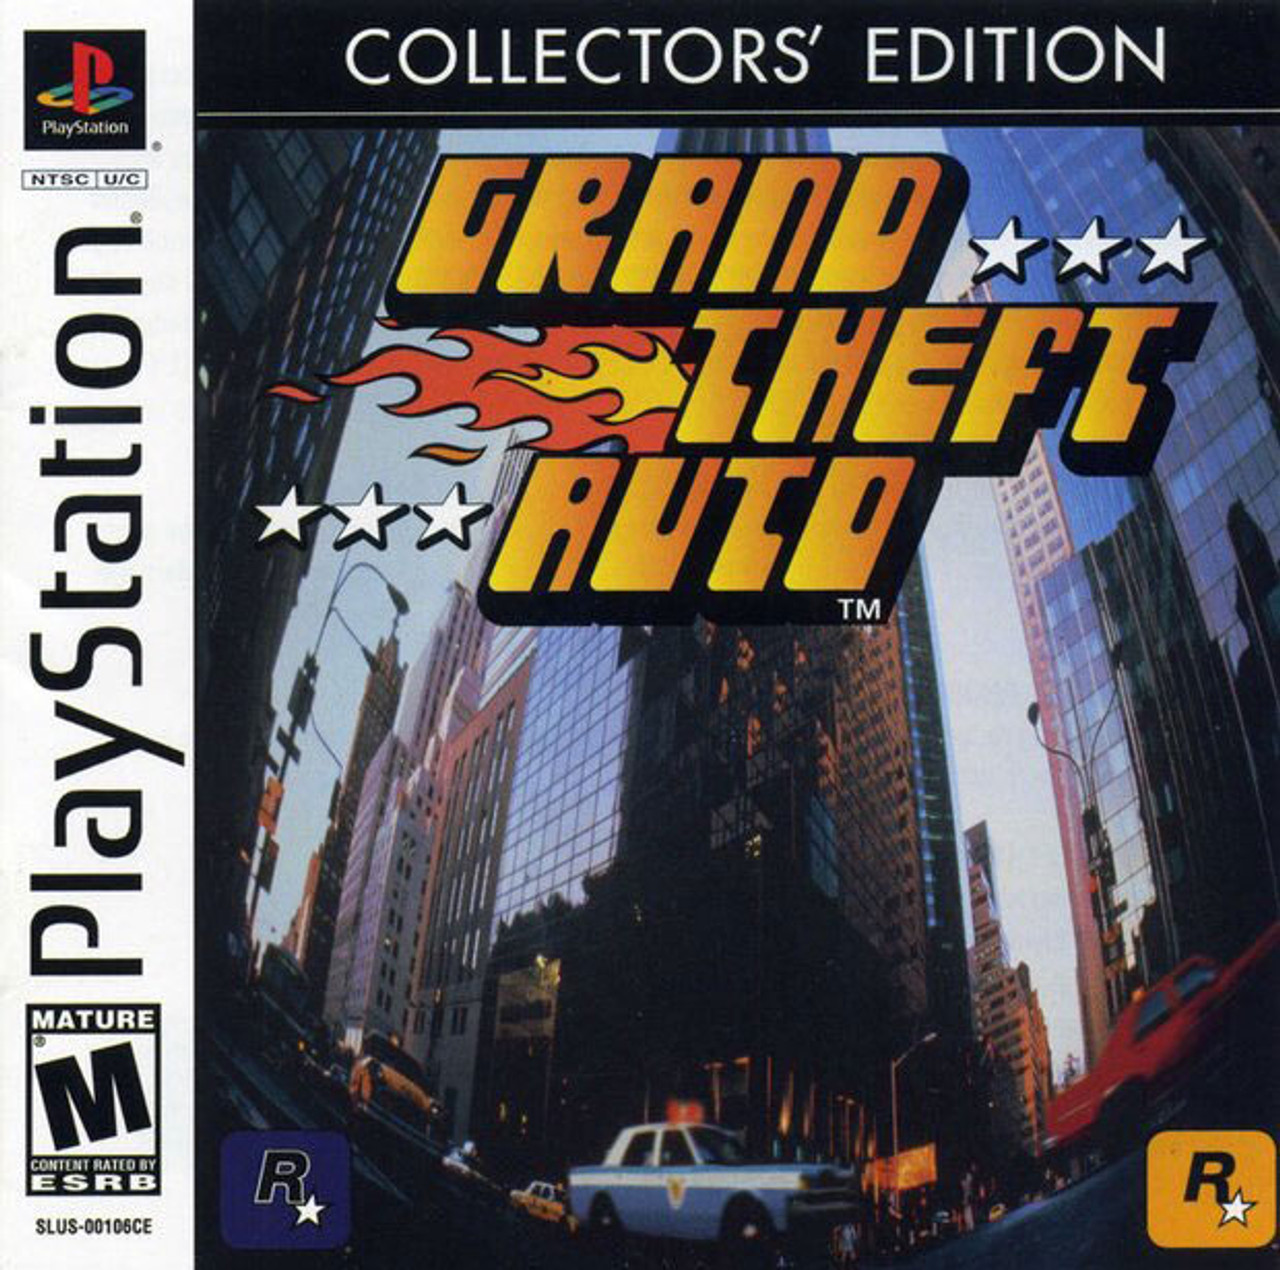 GTA 2:Grand Theft AuTo 2 Playstation 1 PS1 Game For Sale